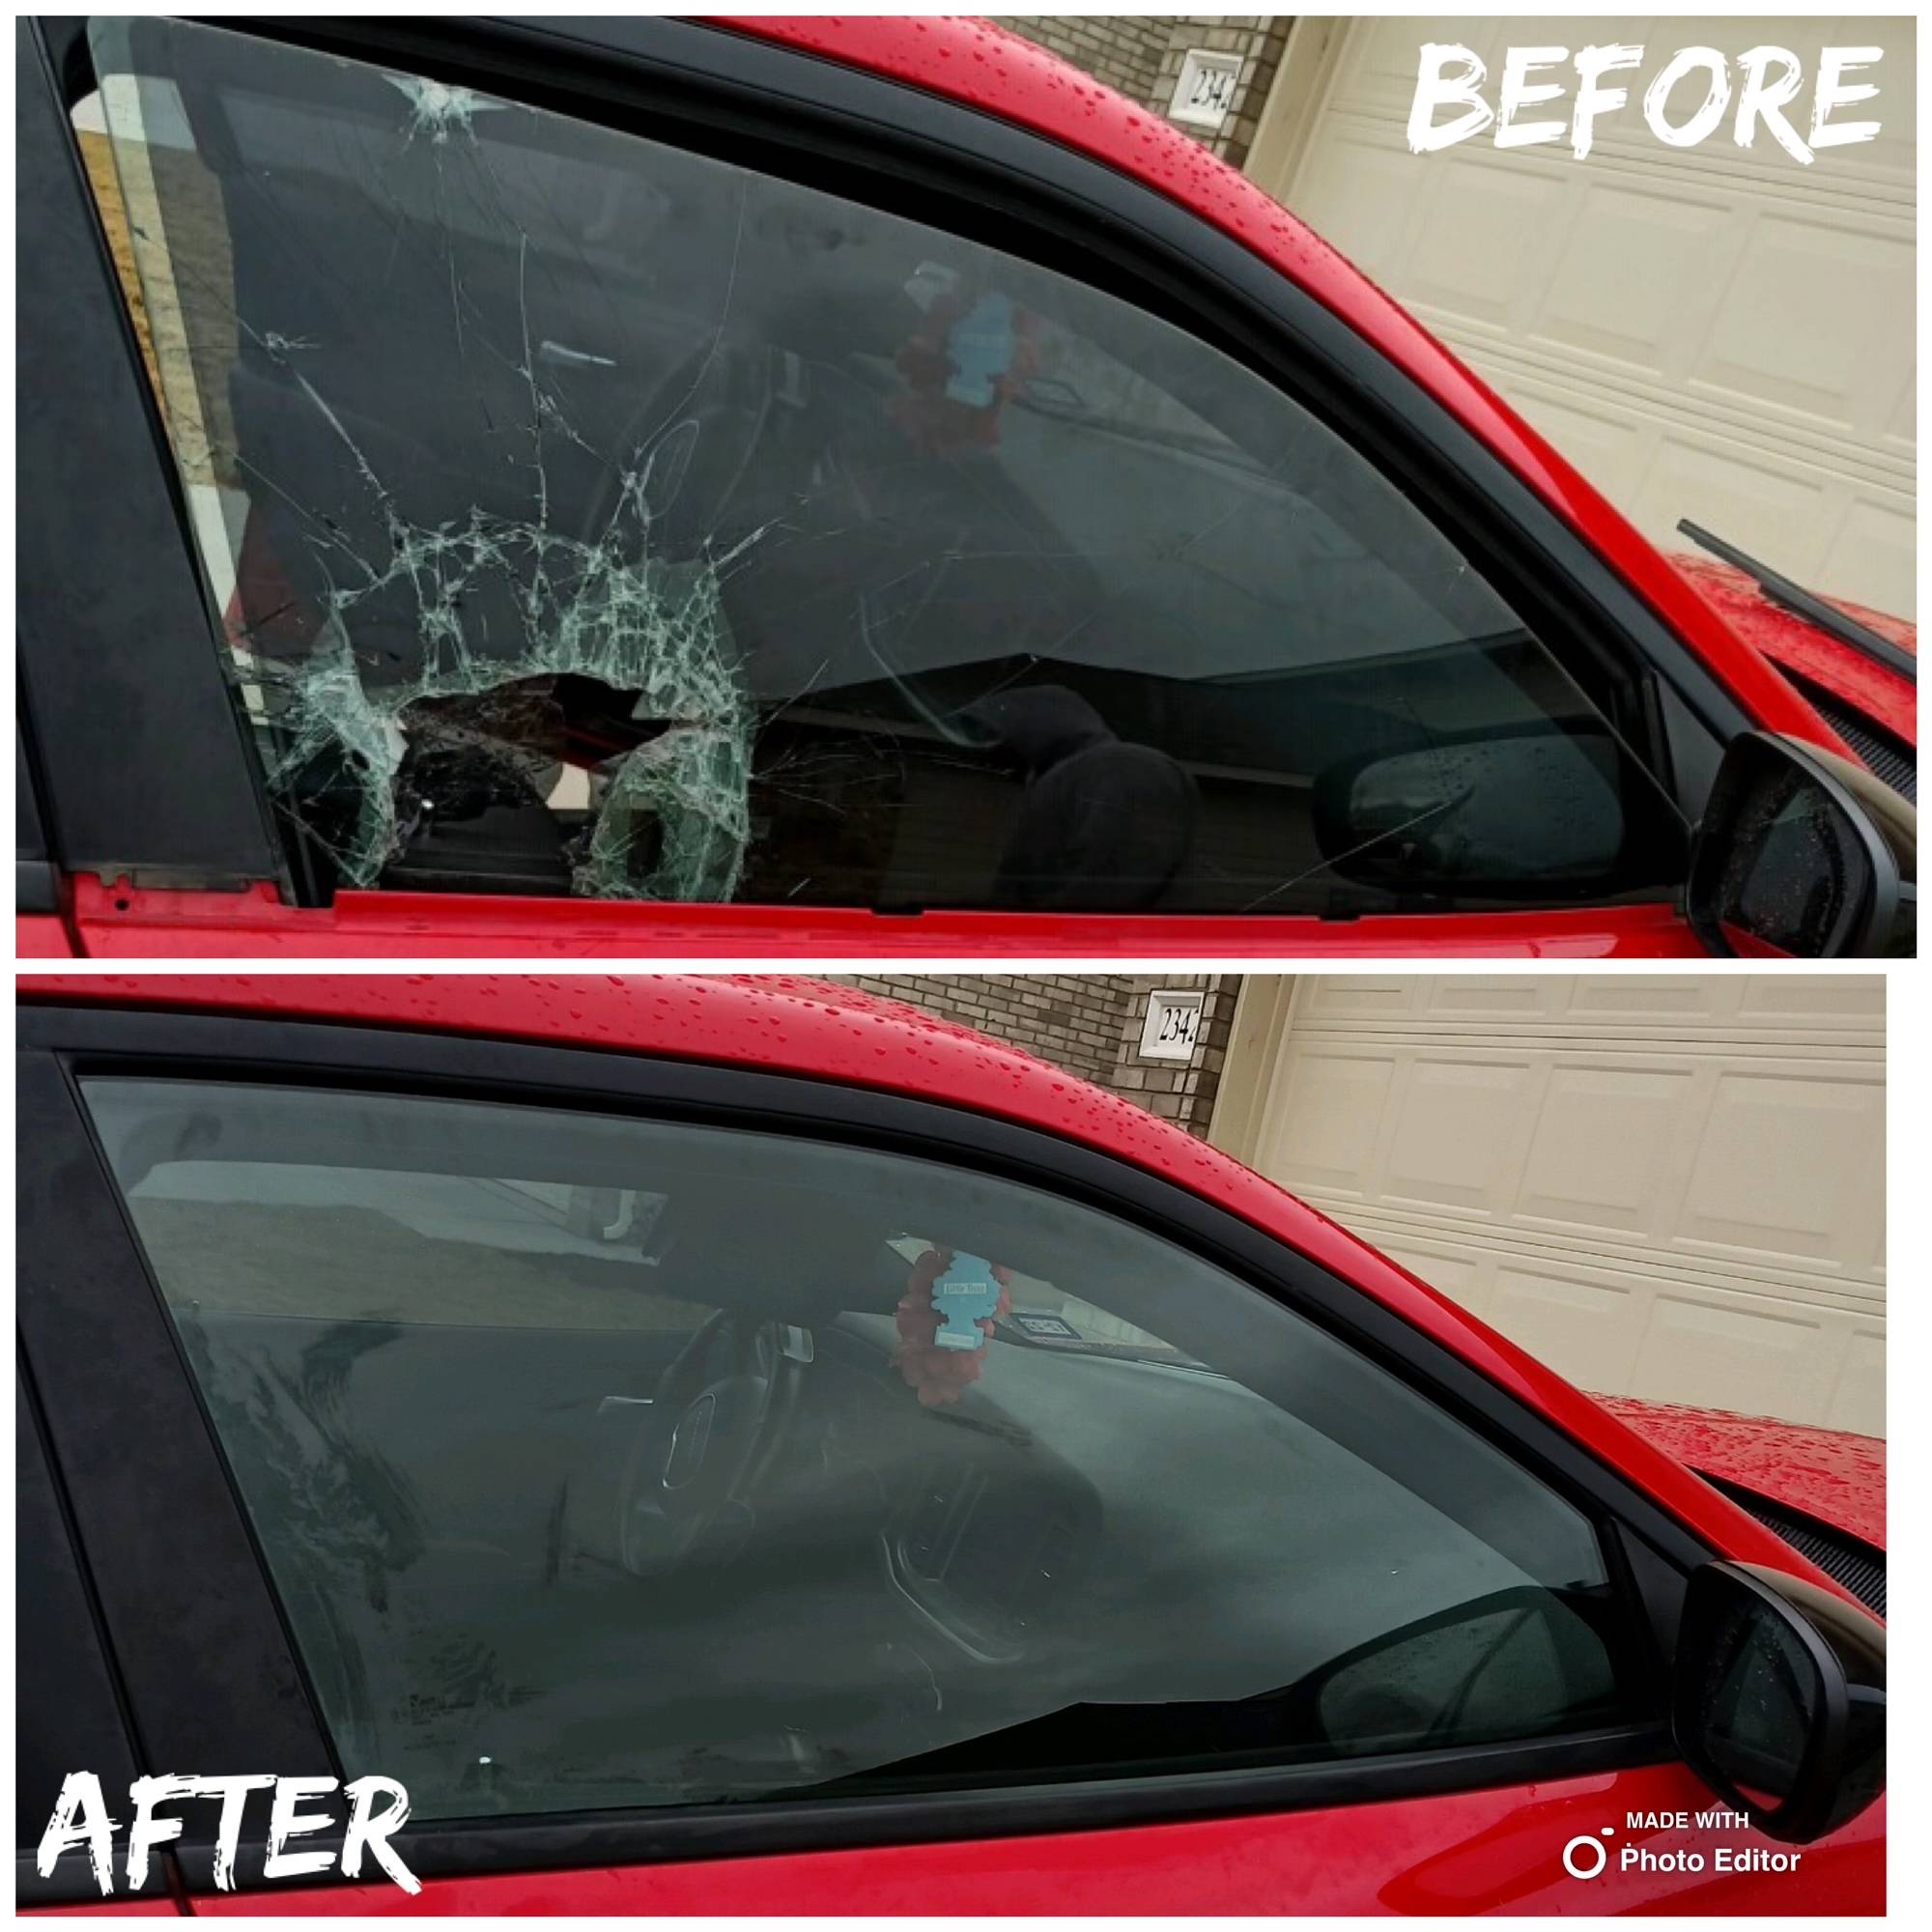 Before and after images of a car's right front door glass, with the top image showing the broken glass from a break-in and the bottom image displaying the repaired glass in Downtown San Antonio, Texas.